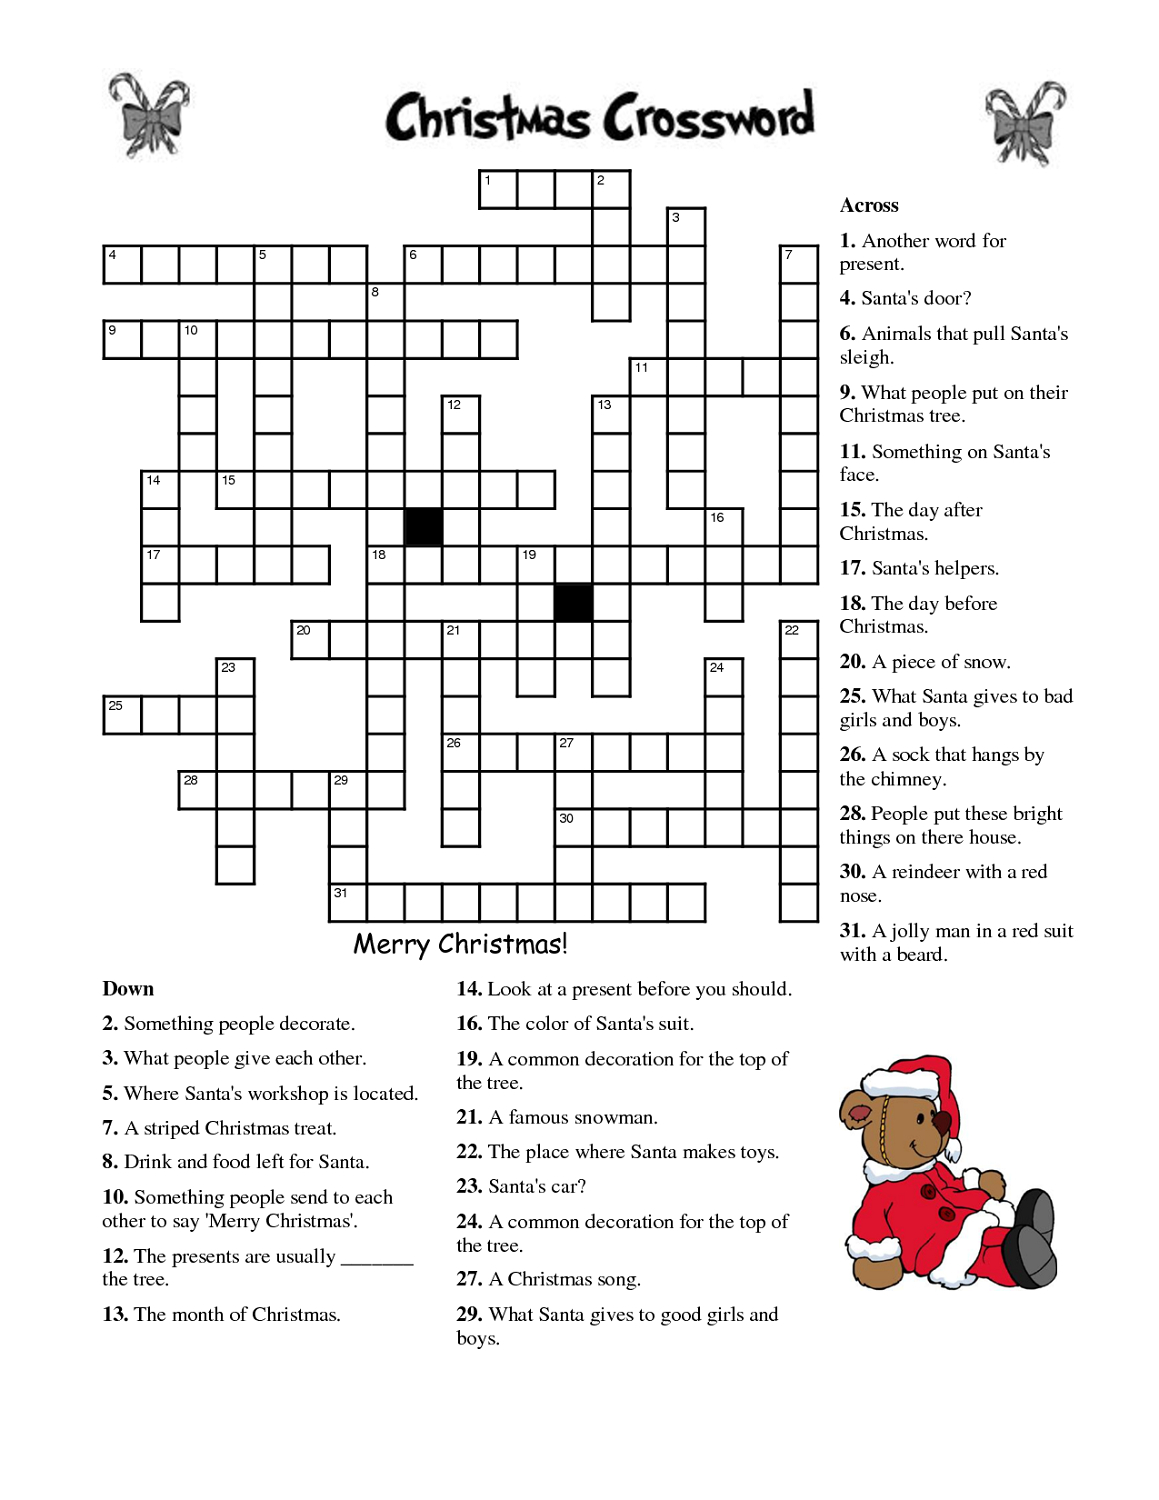 Printable Christmas Crossword Puzzles And Answers